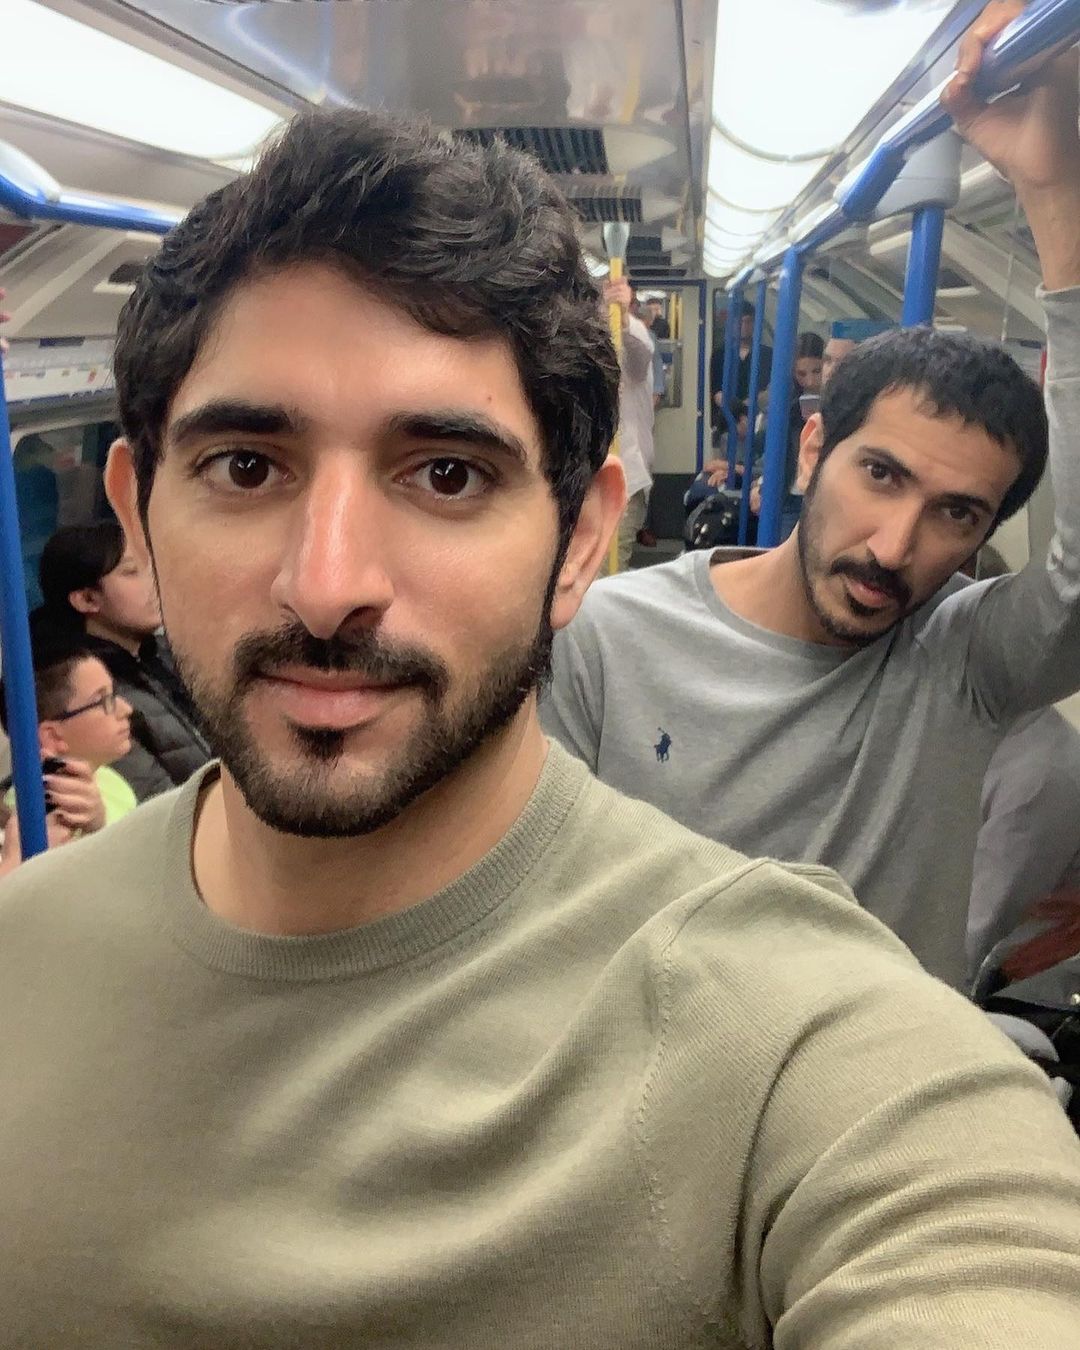 Crown Prince of Dubai goes unnoticed while travelling in London